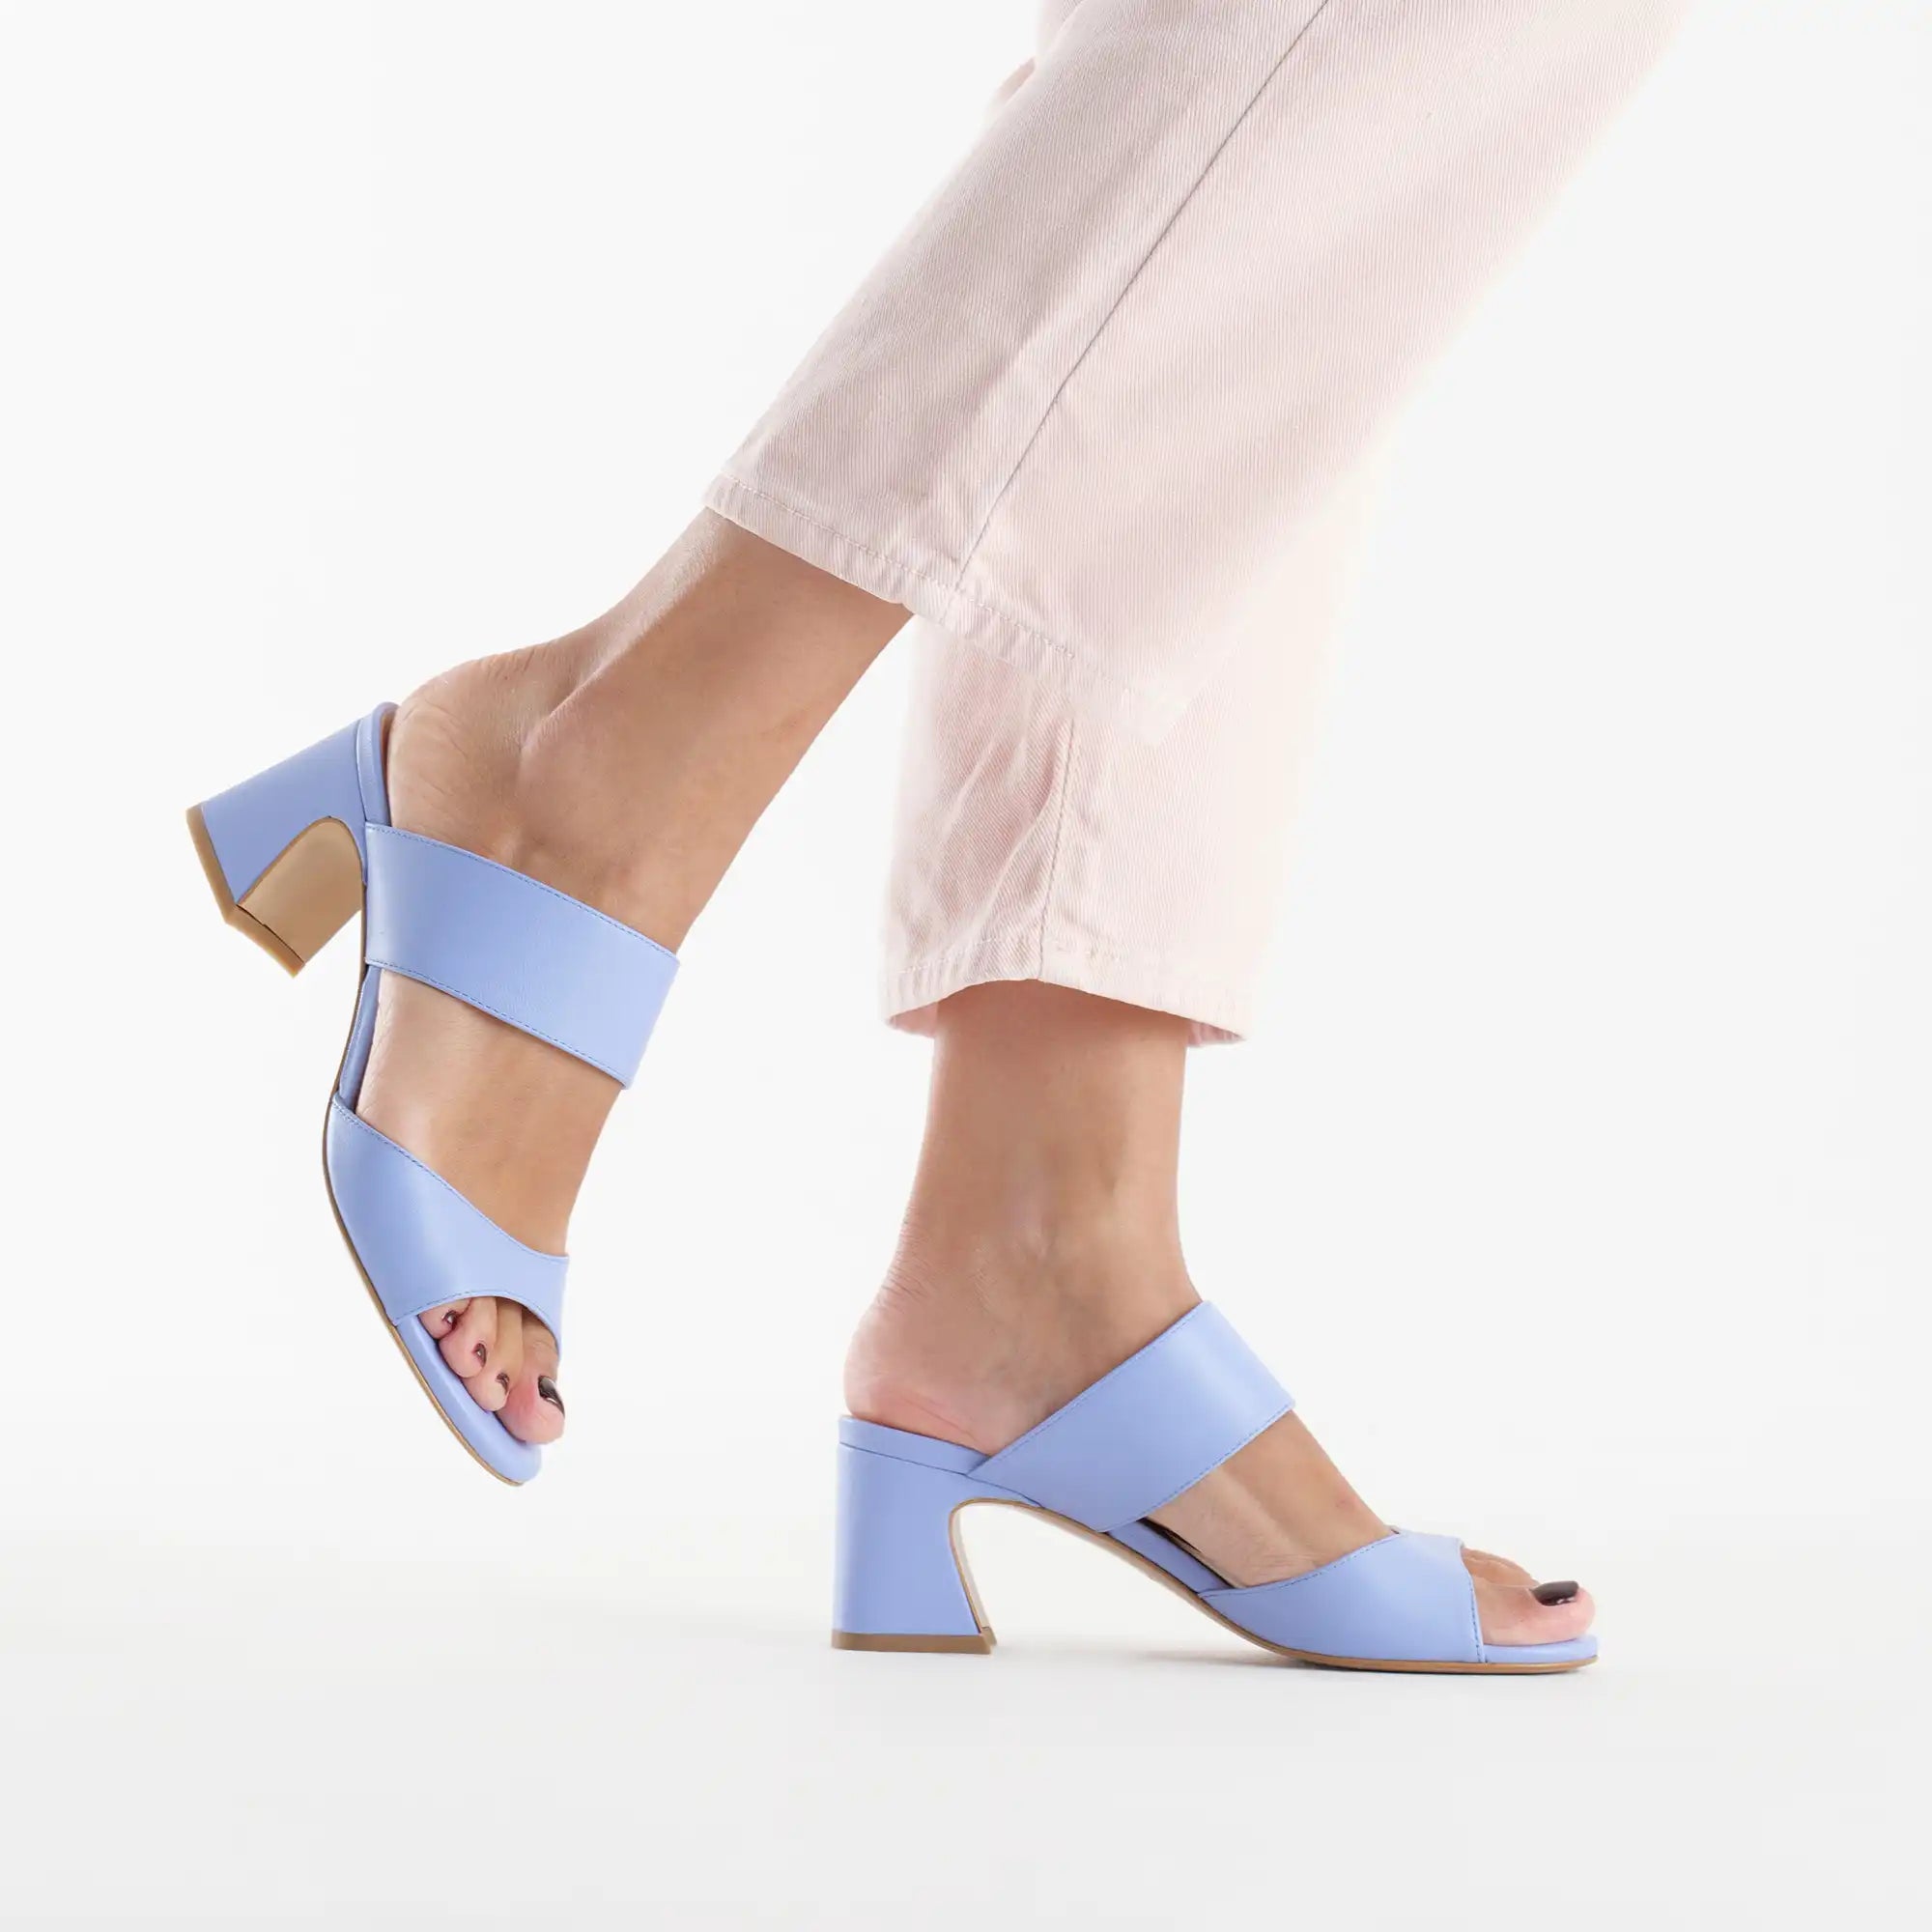 Elle mules sandal with low wide heel and instep band in powder blue leather